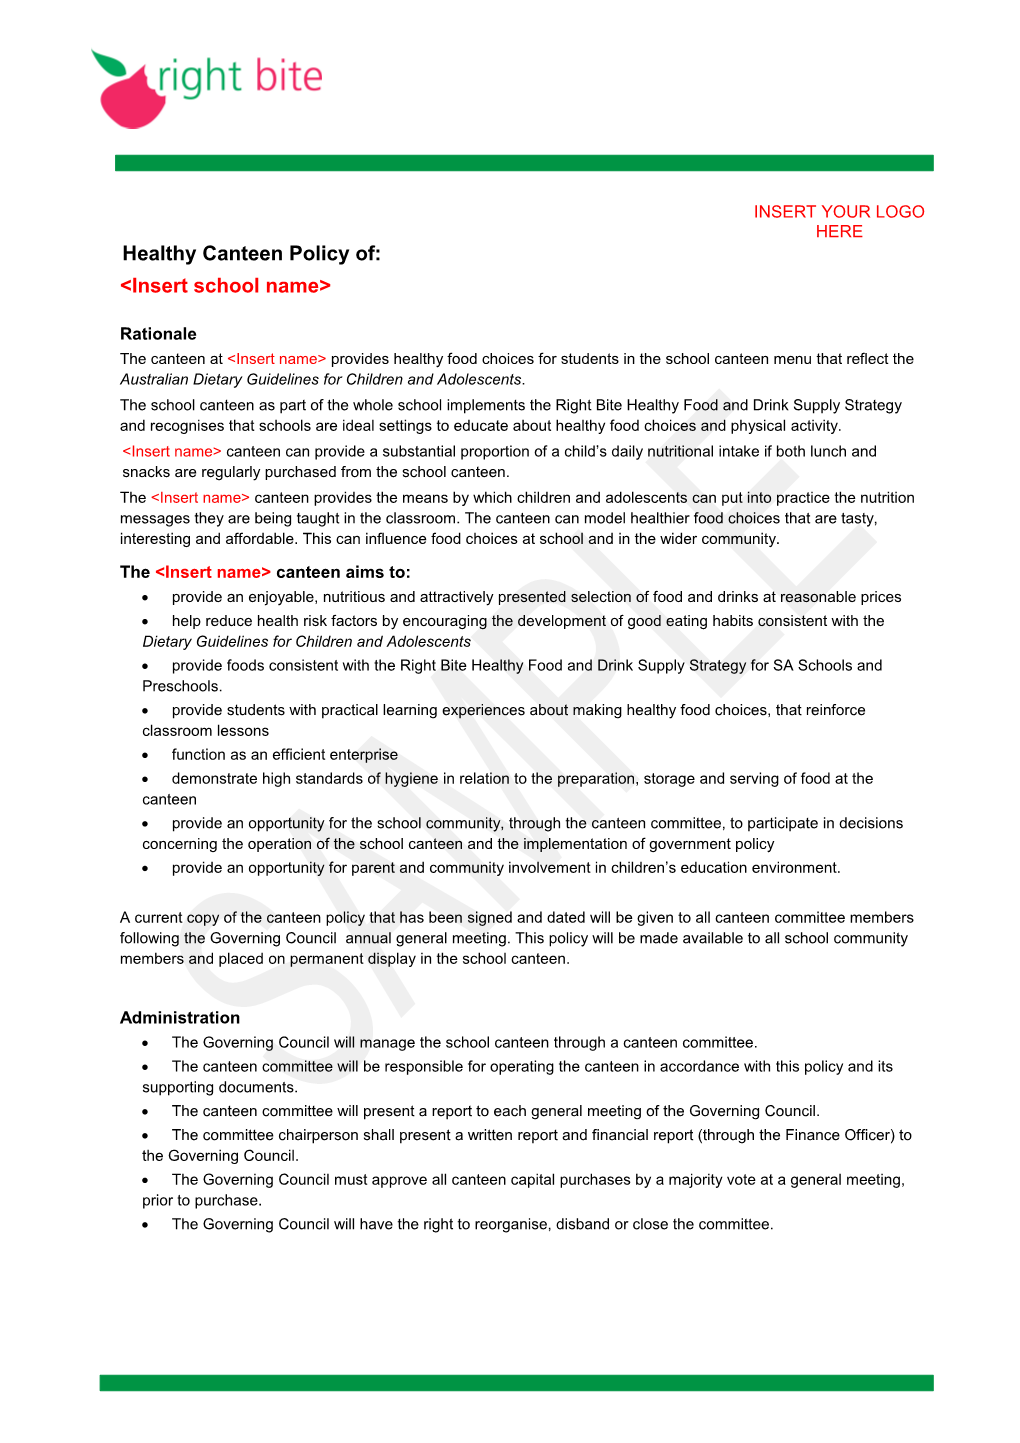 Healthy Canteen Policy Sample